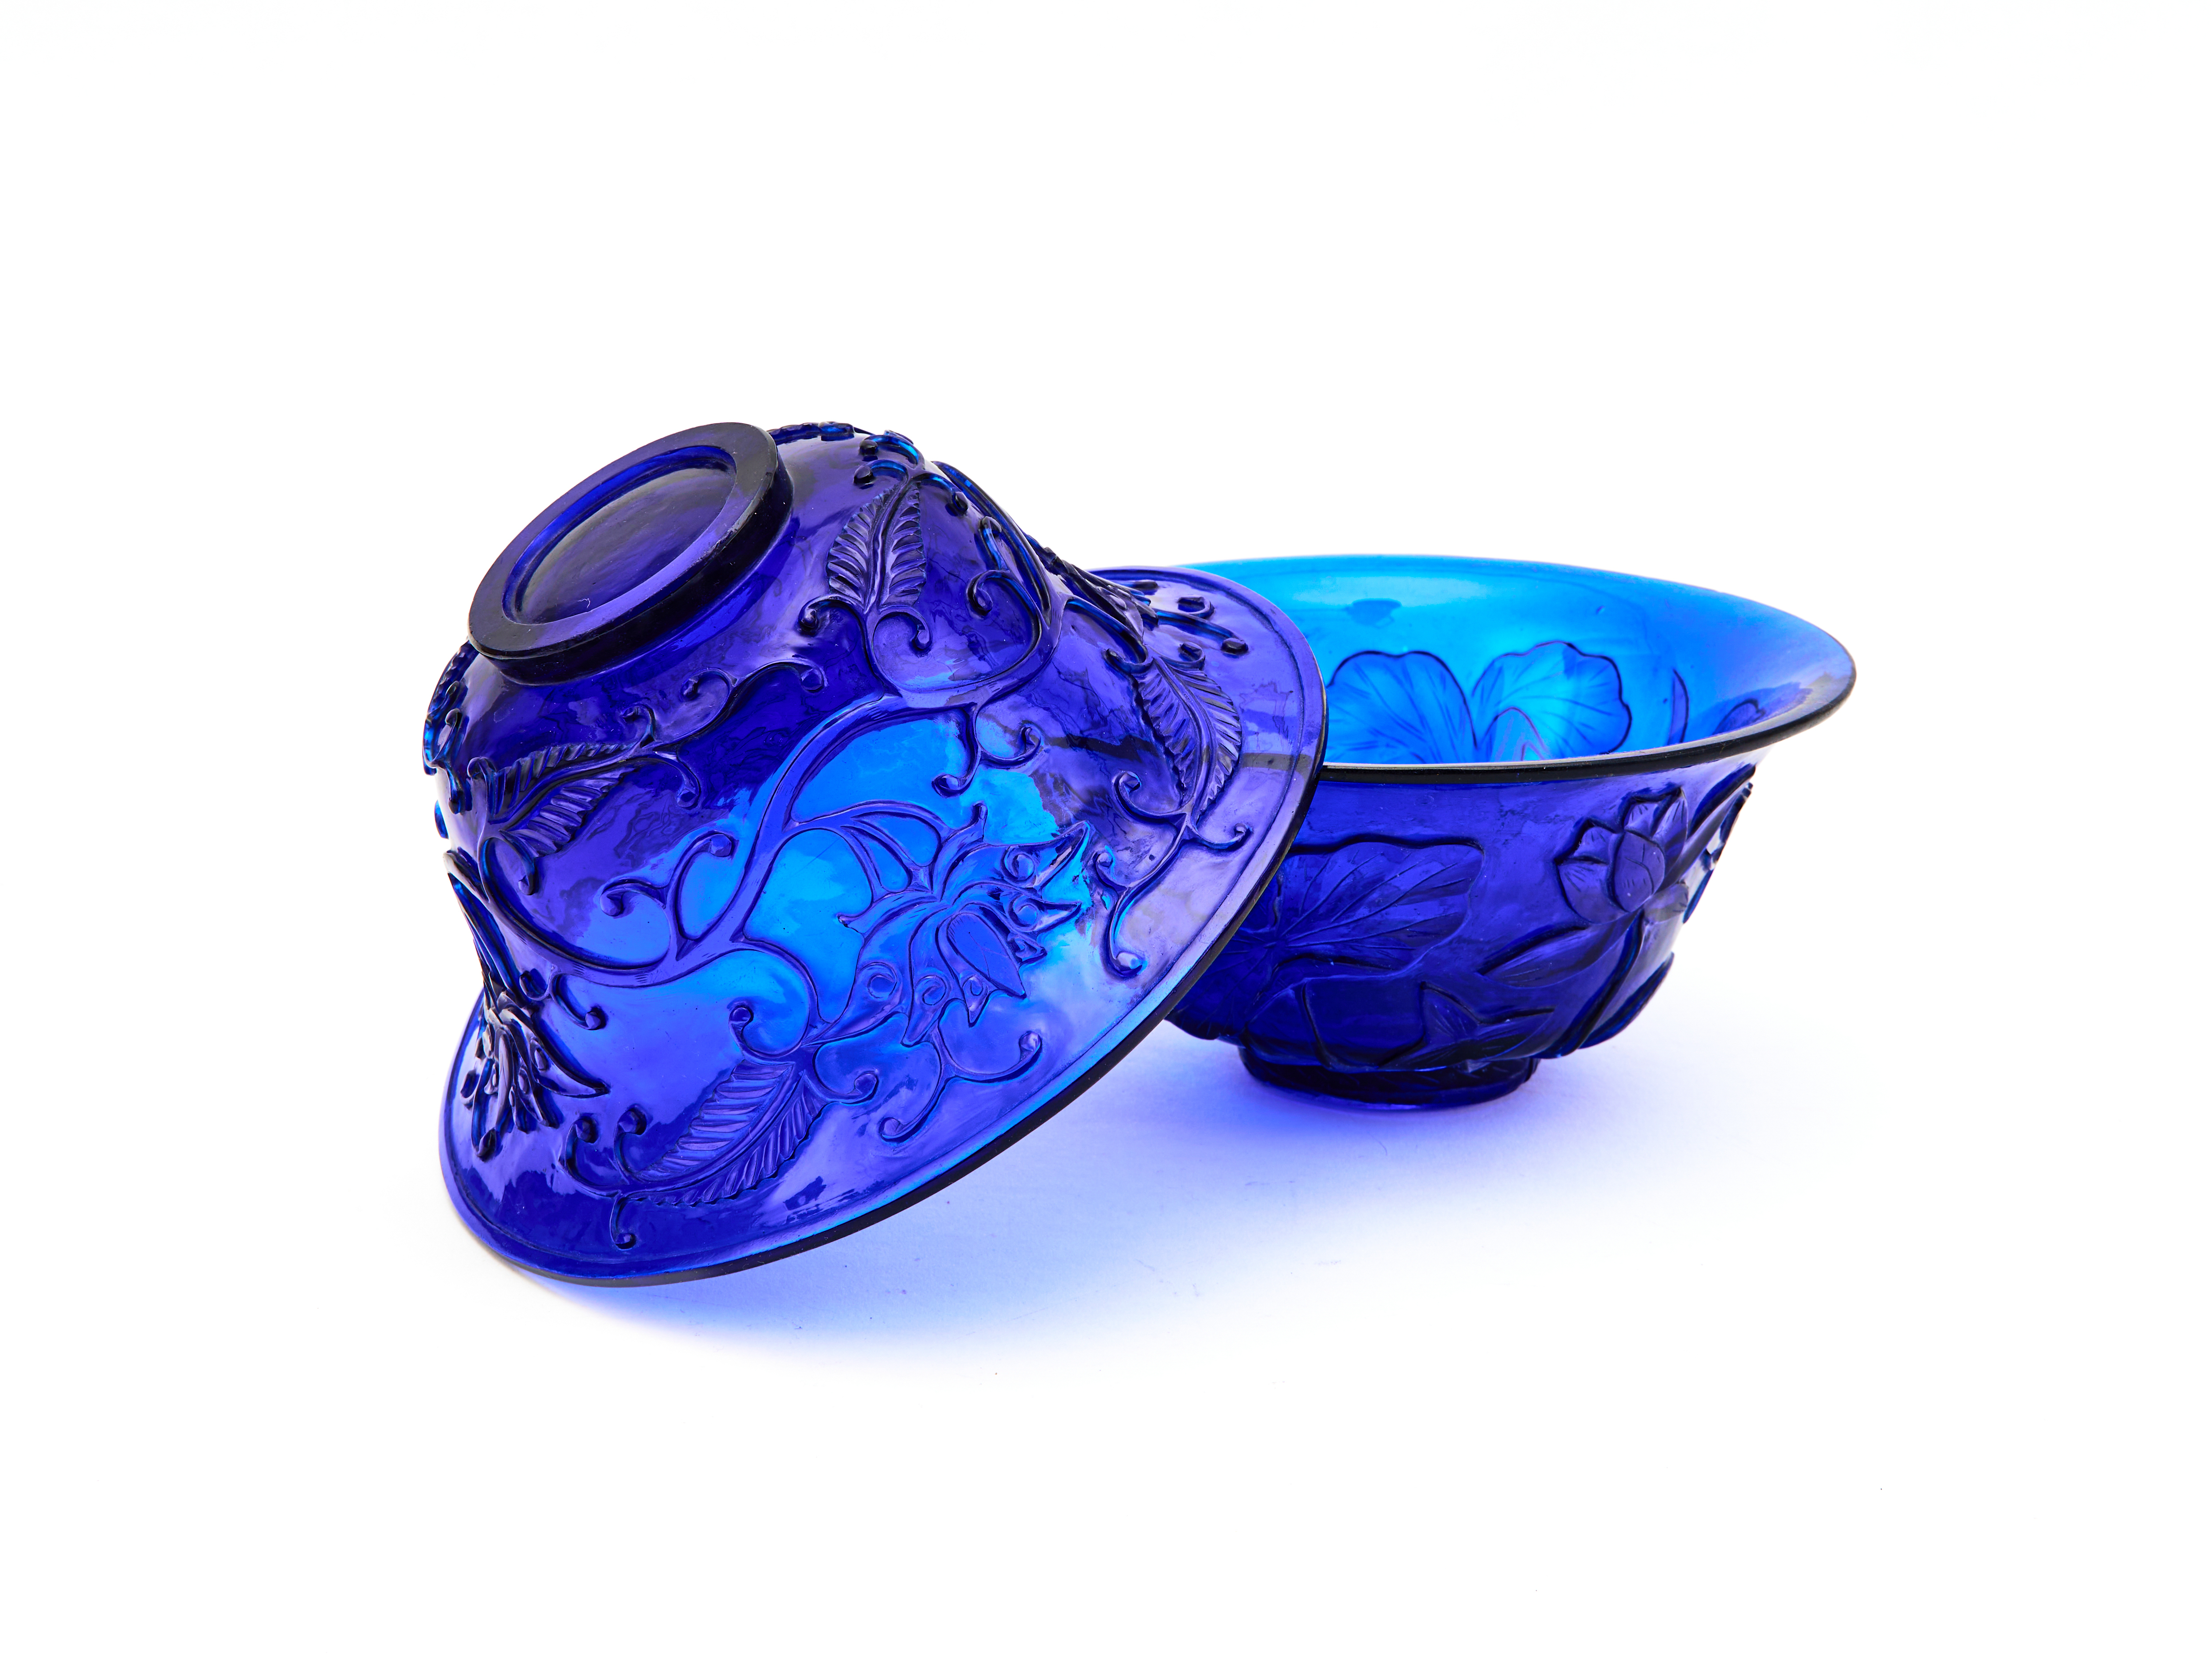 A PAIR OF CARVED BLUE GLASS BOWLS CHINA, QING DYNASTY (1644-1911) - Image 4 of 4